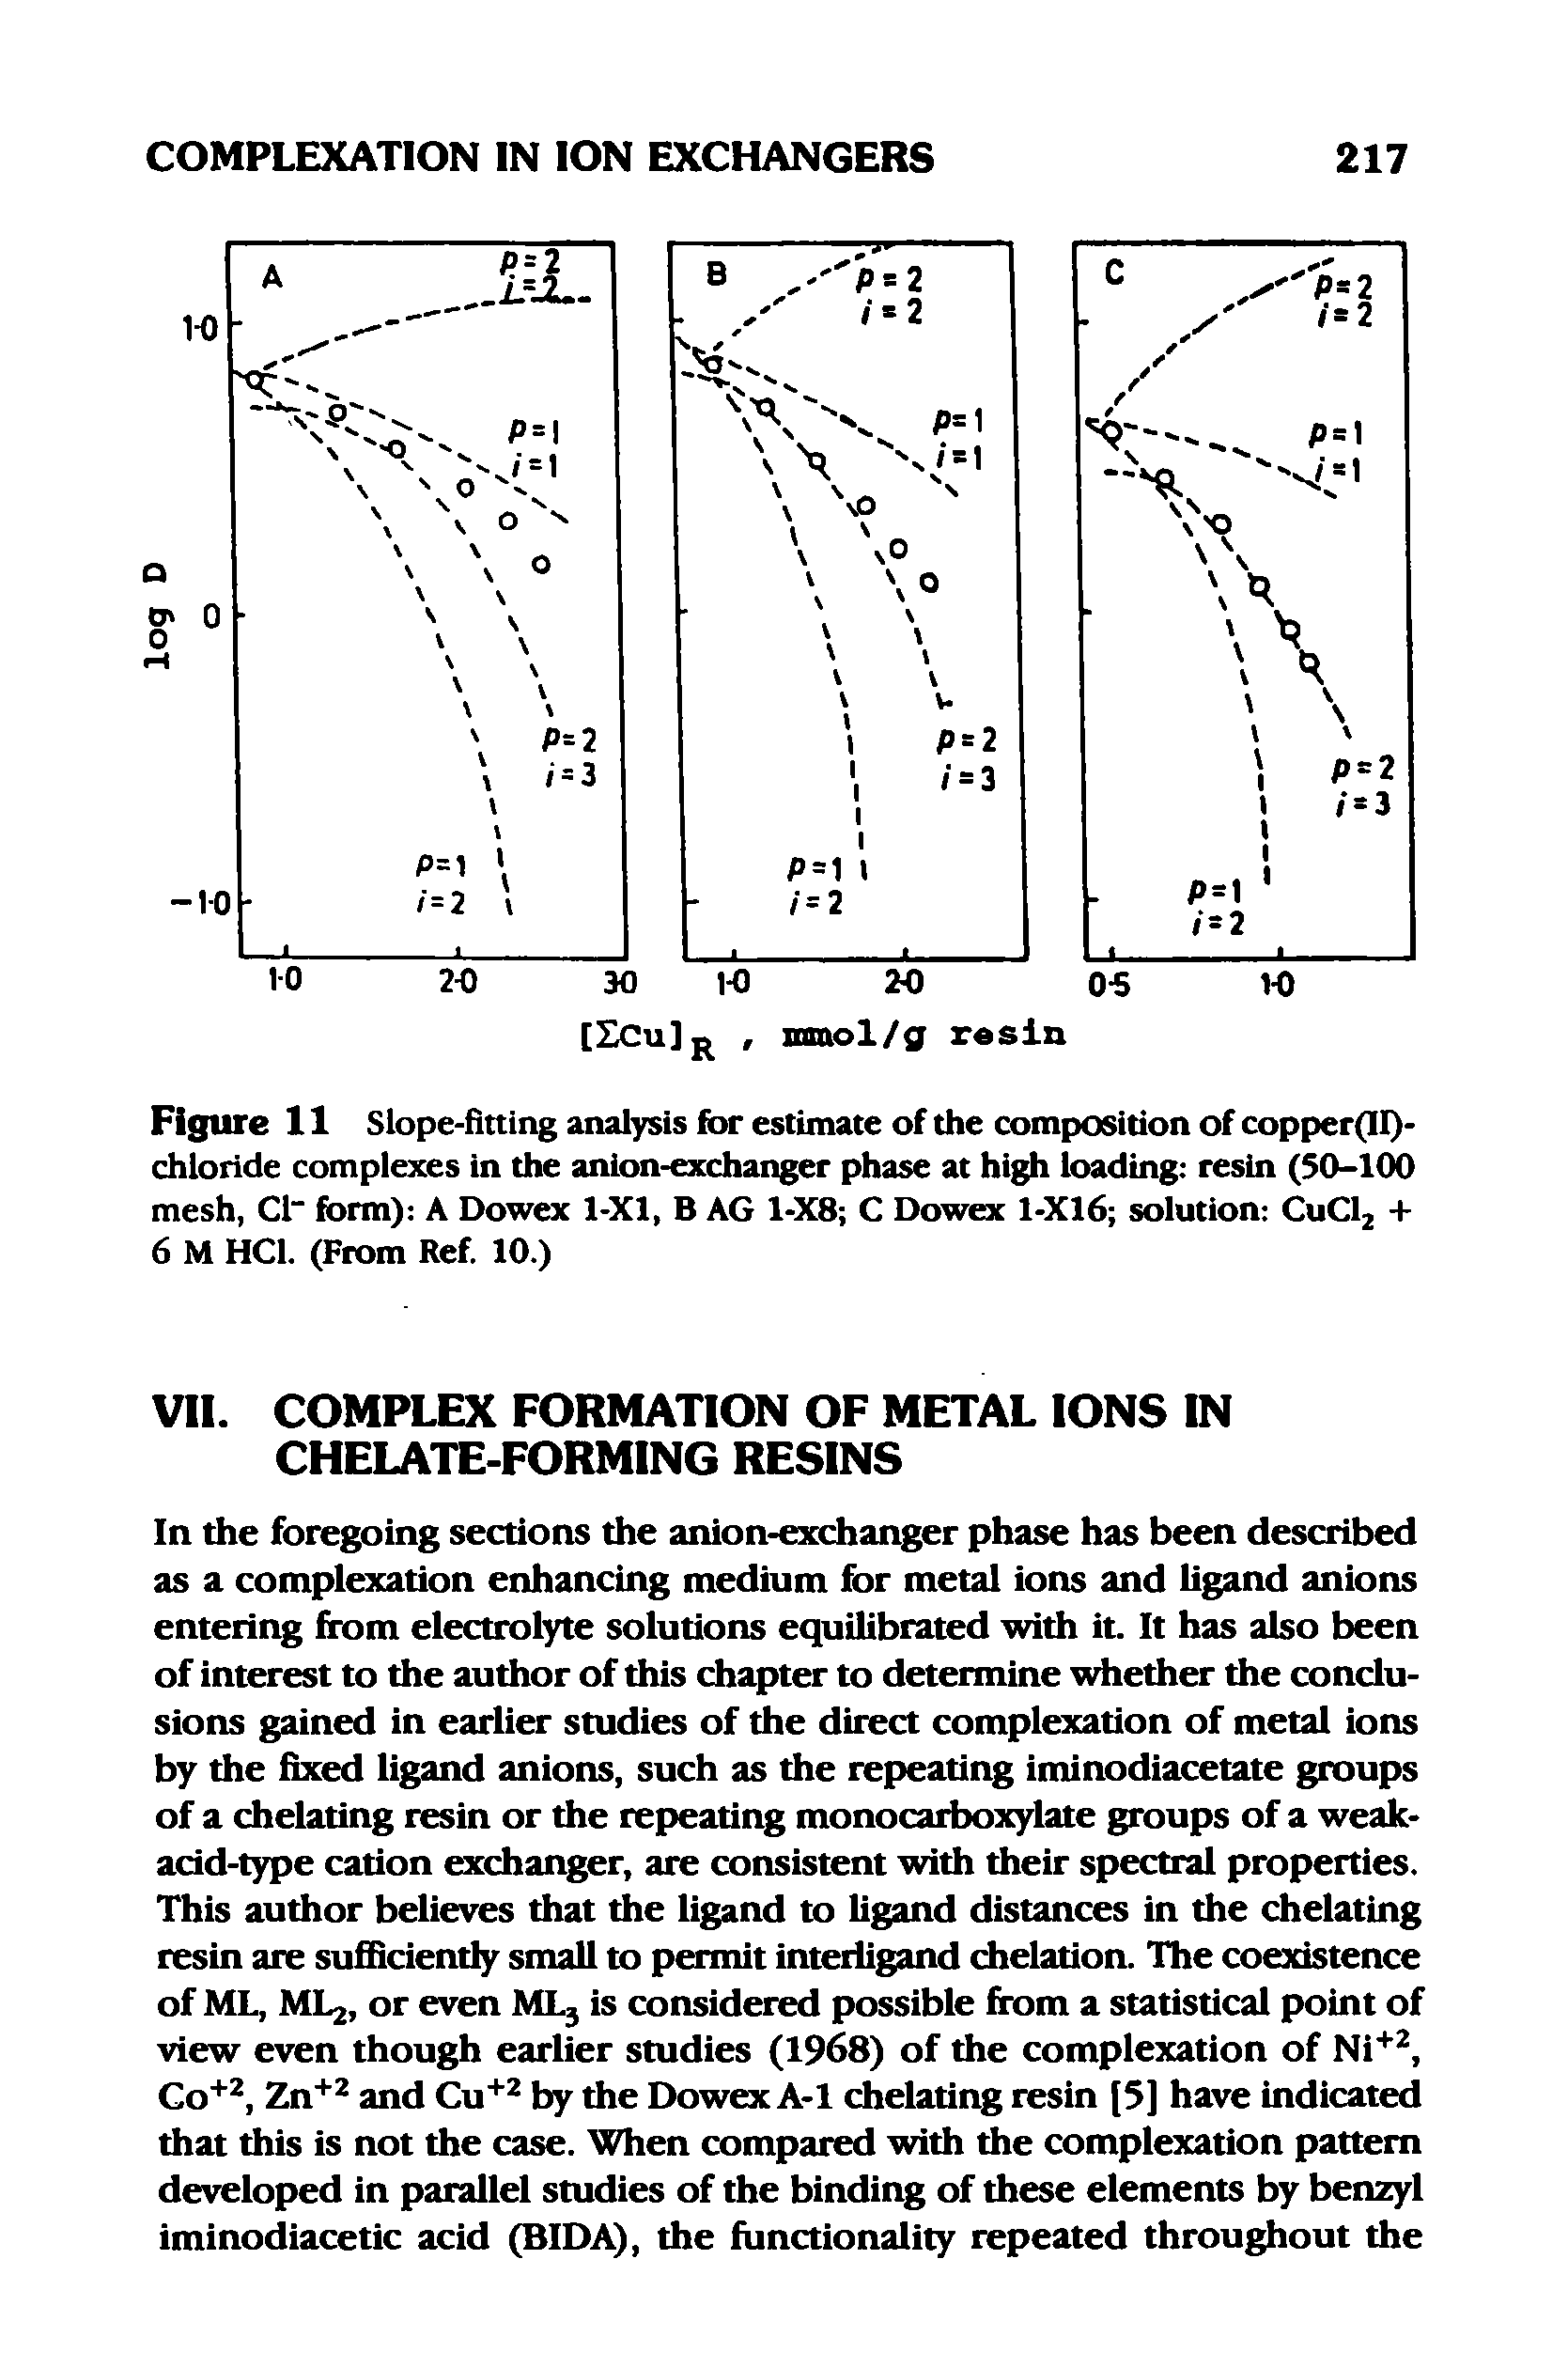 Figure 11 Slope-fitting analysis for estimate of the composition of copper(II)-chloride complexes in the anion-exchanger phase at high loading resin (50-100 mesh, Cl form) A Dowex 1-Xl, B AG 1-X8 C Dowex 1-X16 solution CuClj + 6 M HCl. (From Ref. 10.)...